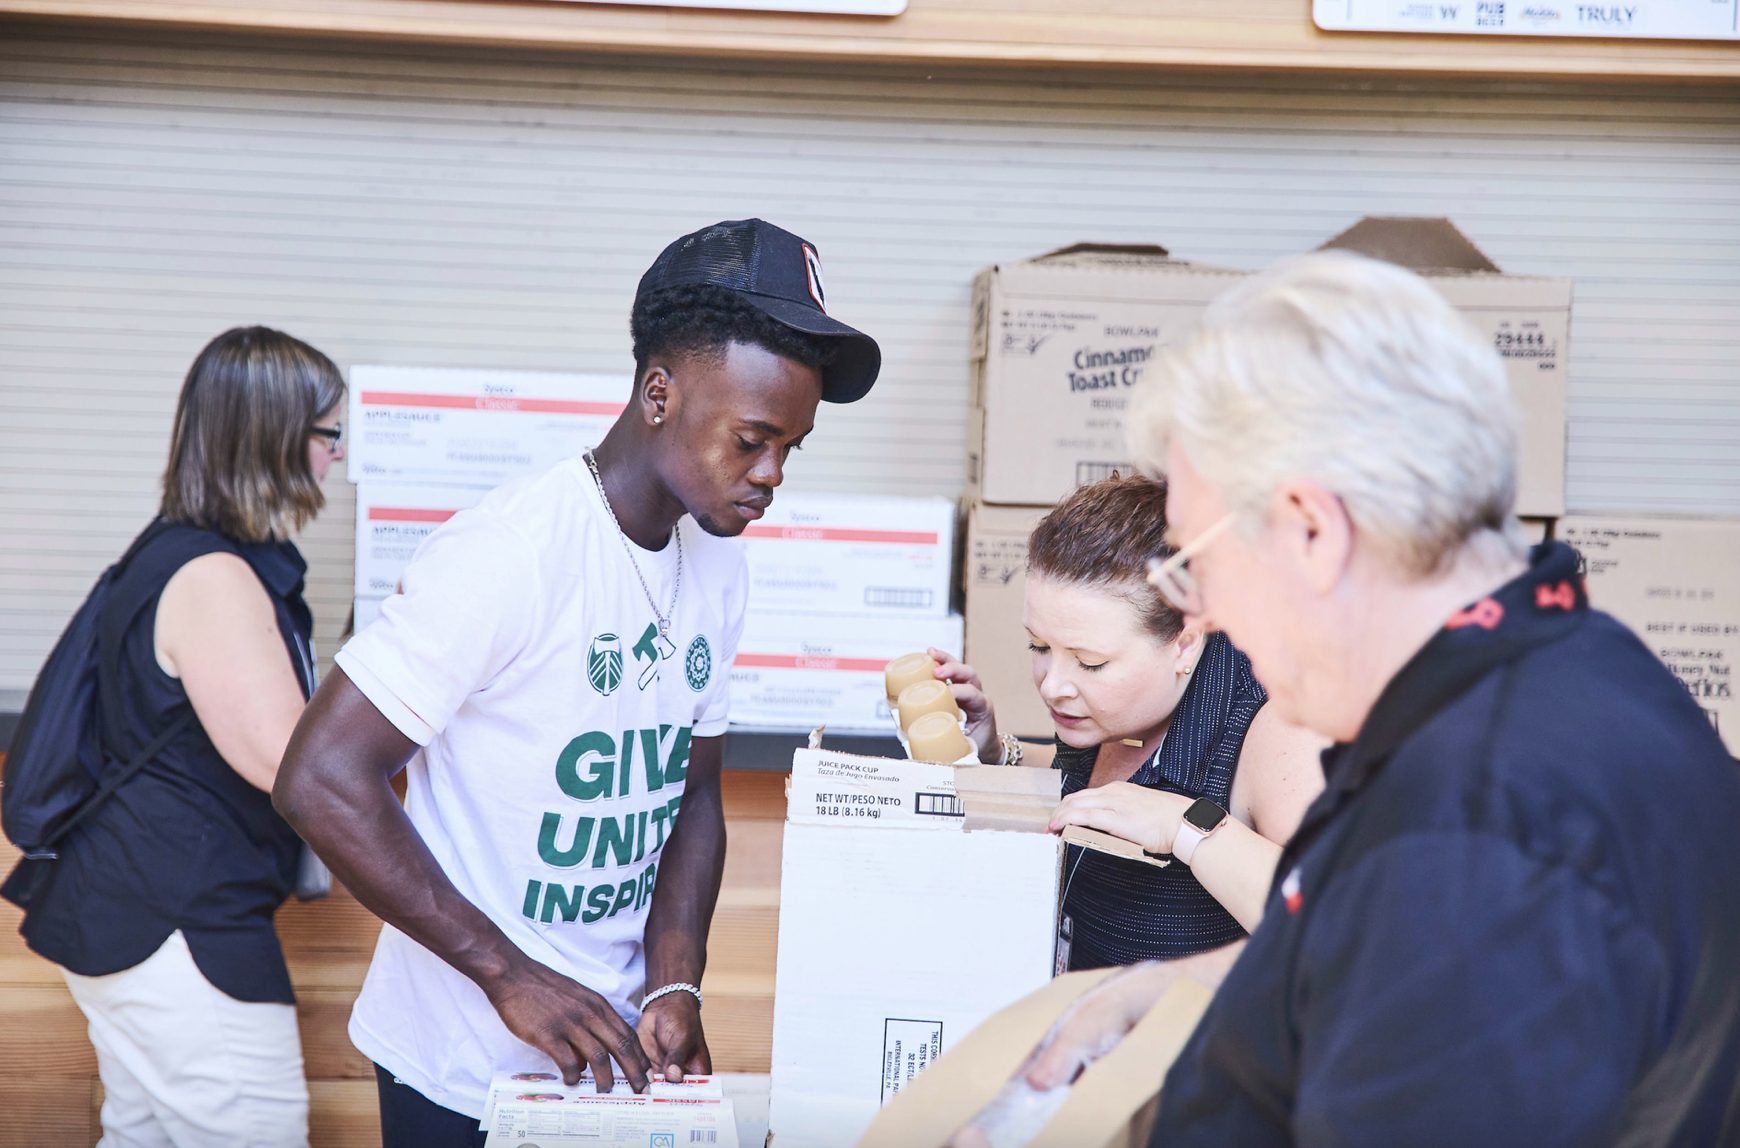 Timbers packing event